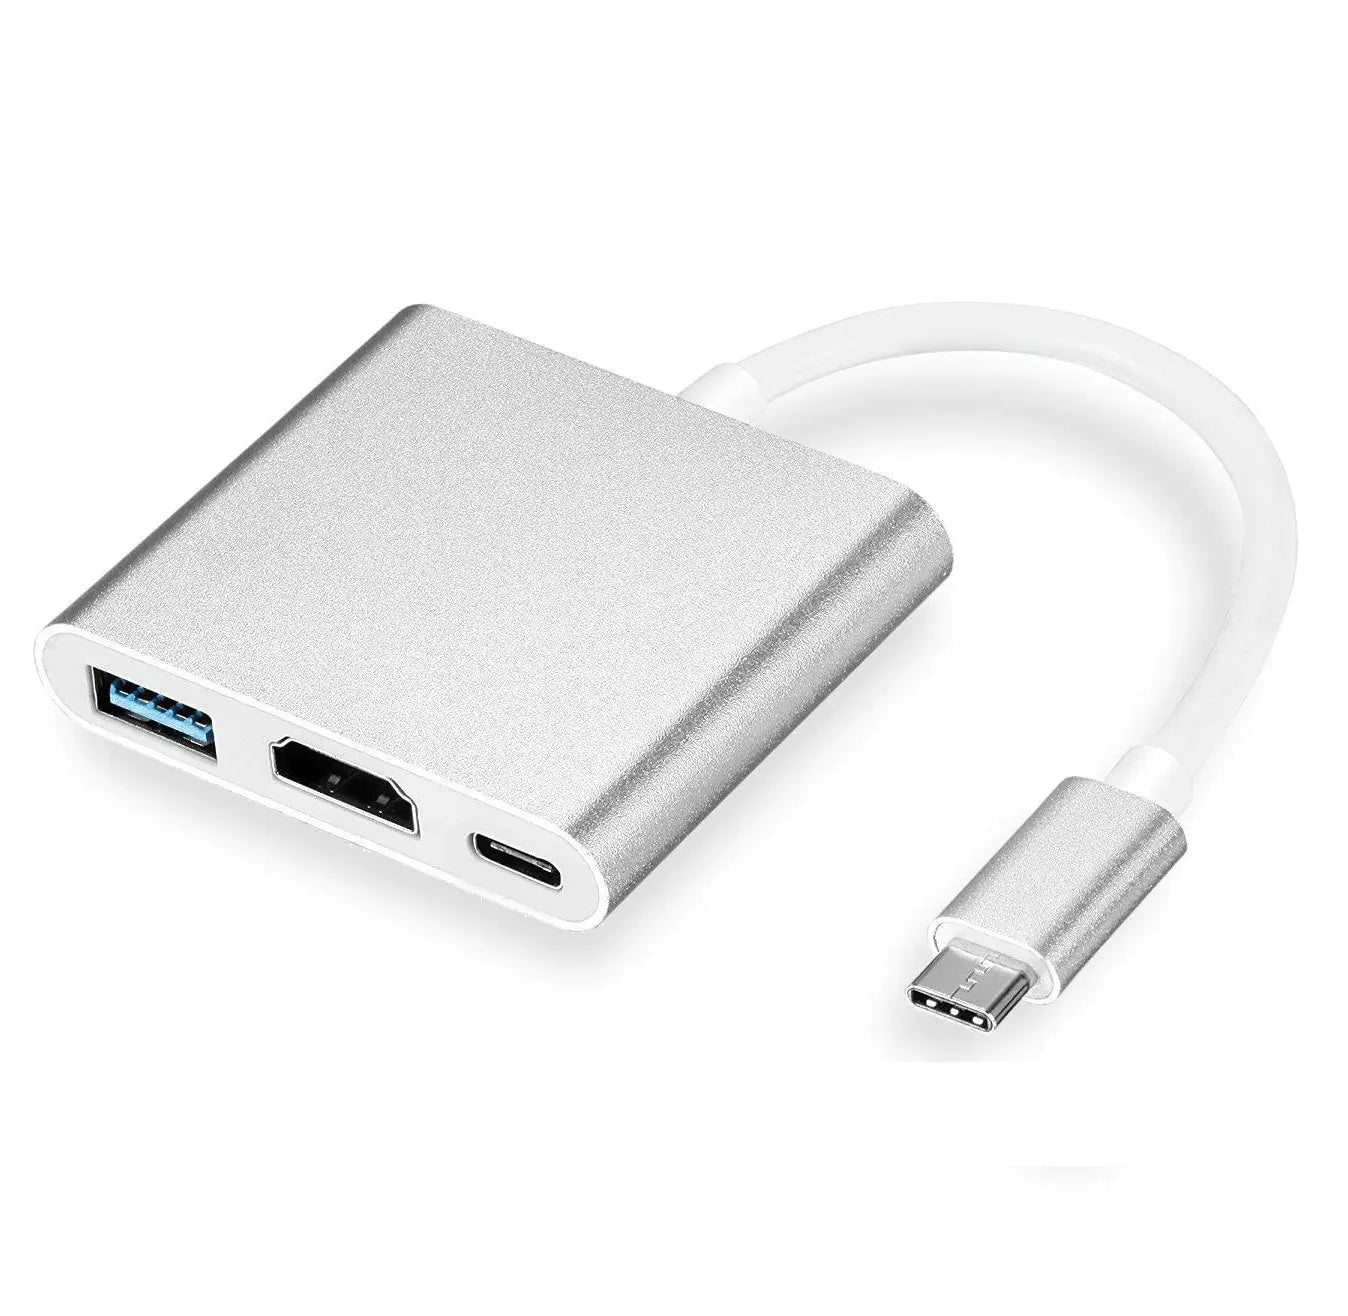 Type C to HDMI & USB Adapter